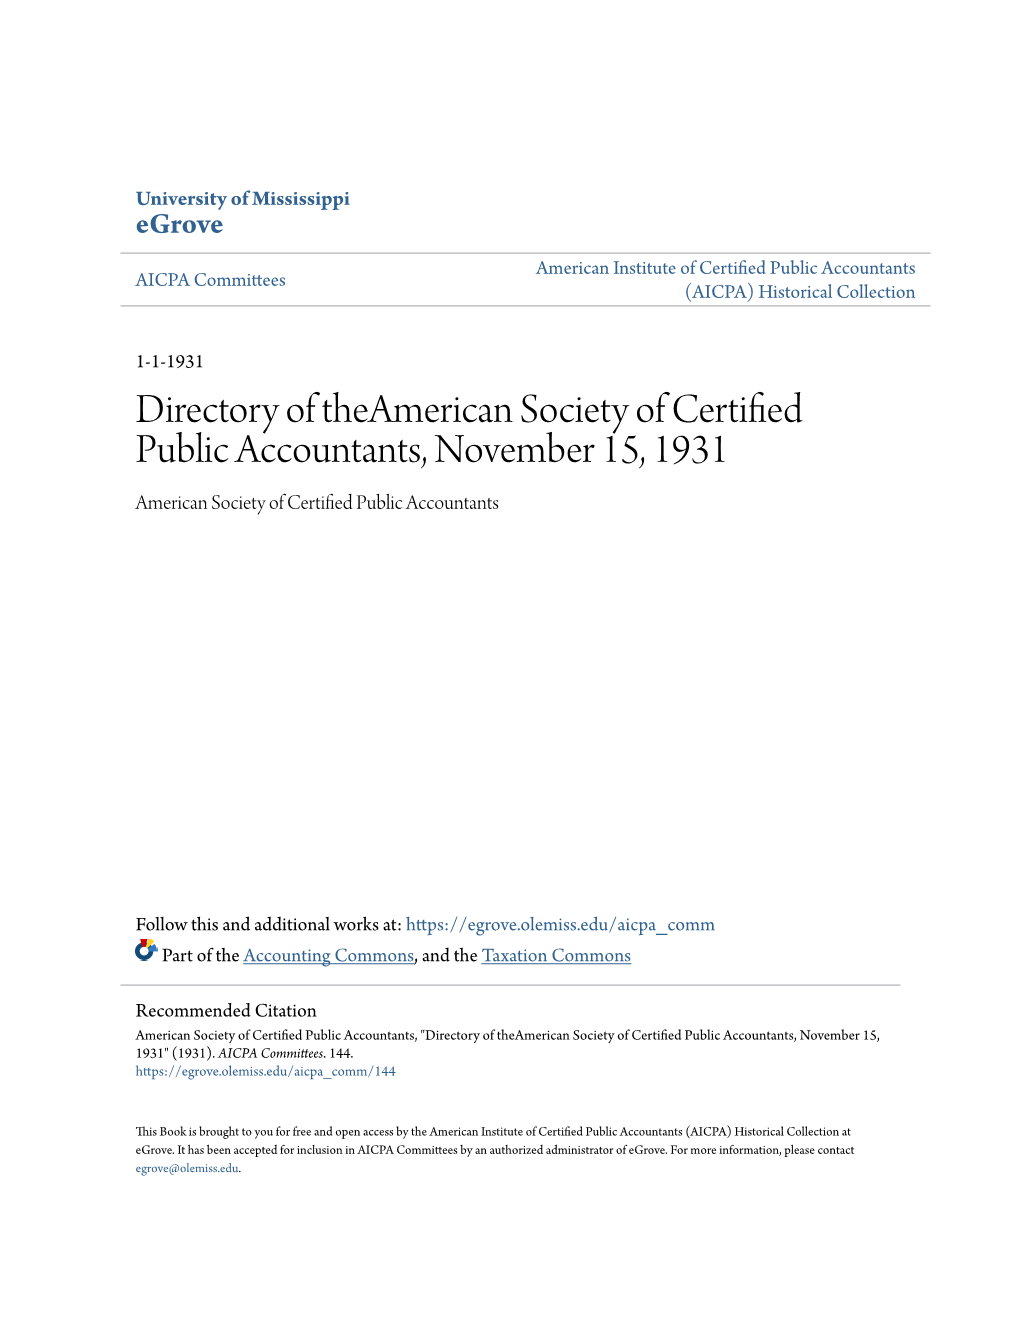 Directory of Theamerican Society of Certified Public Accountants, November 15, 1931 American Society of Certified Public Accountants